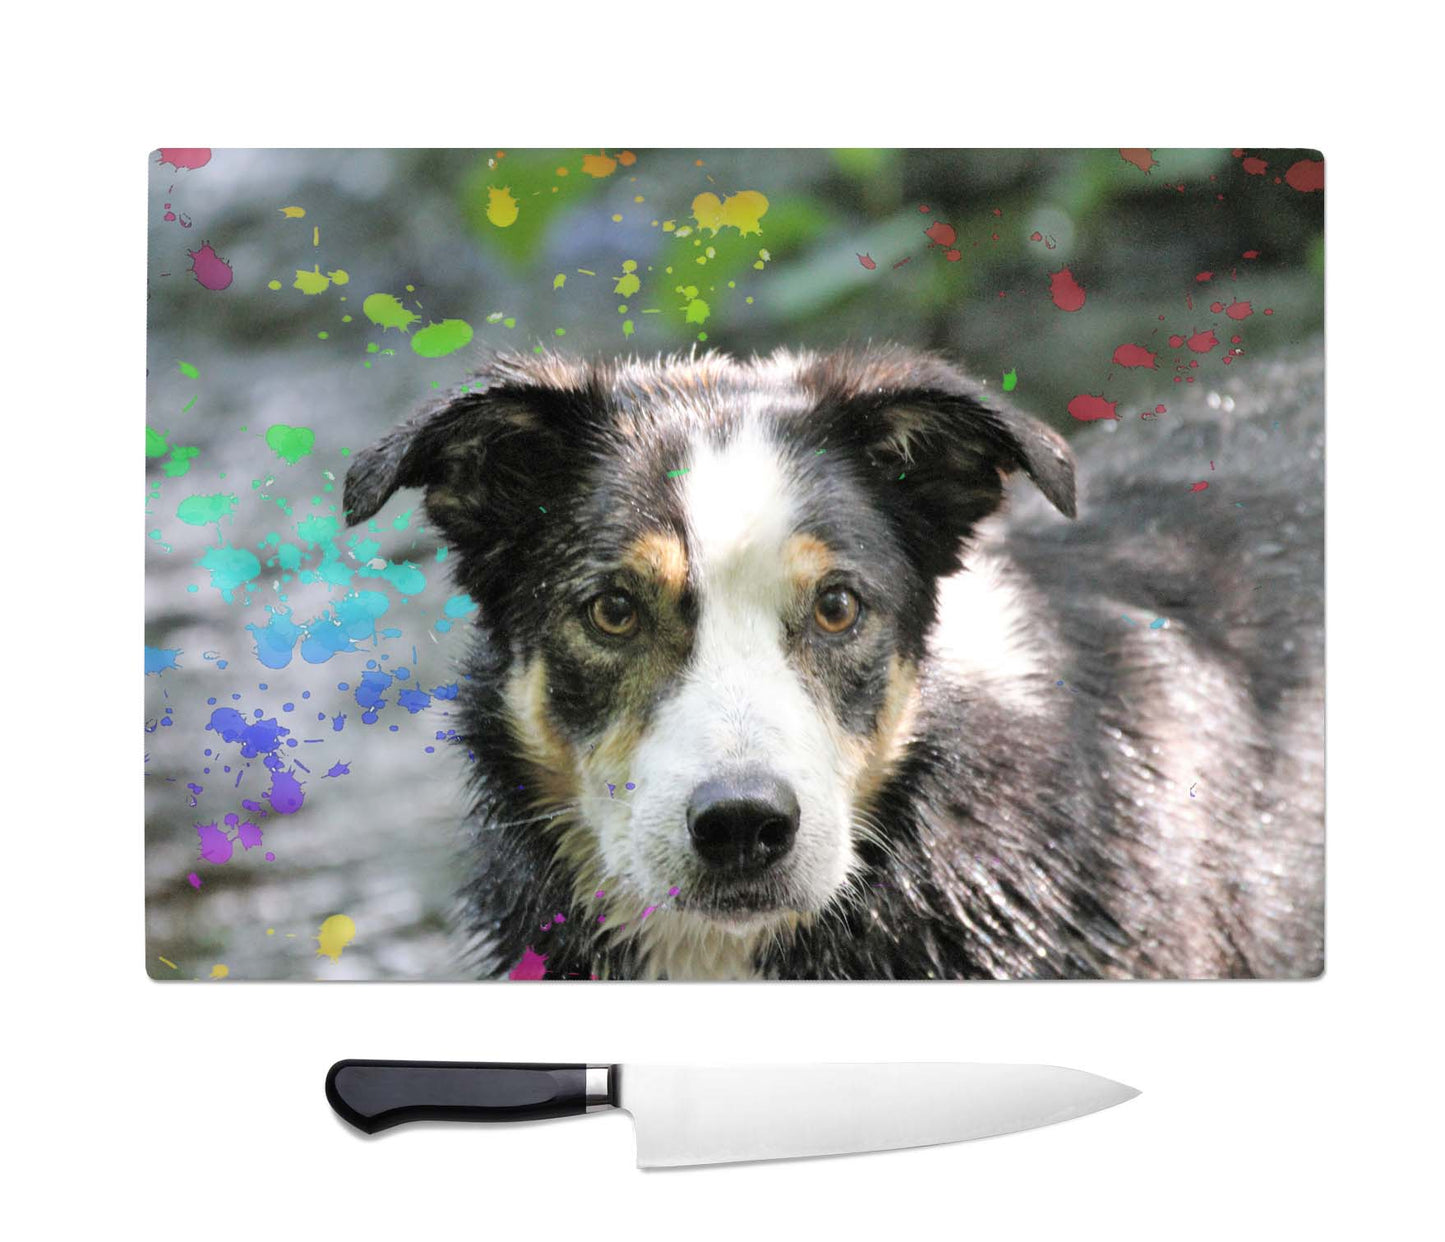 Your own pet personalised chopping board / Worktop saver